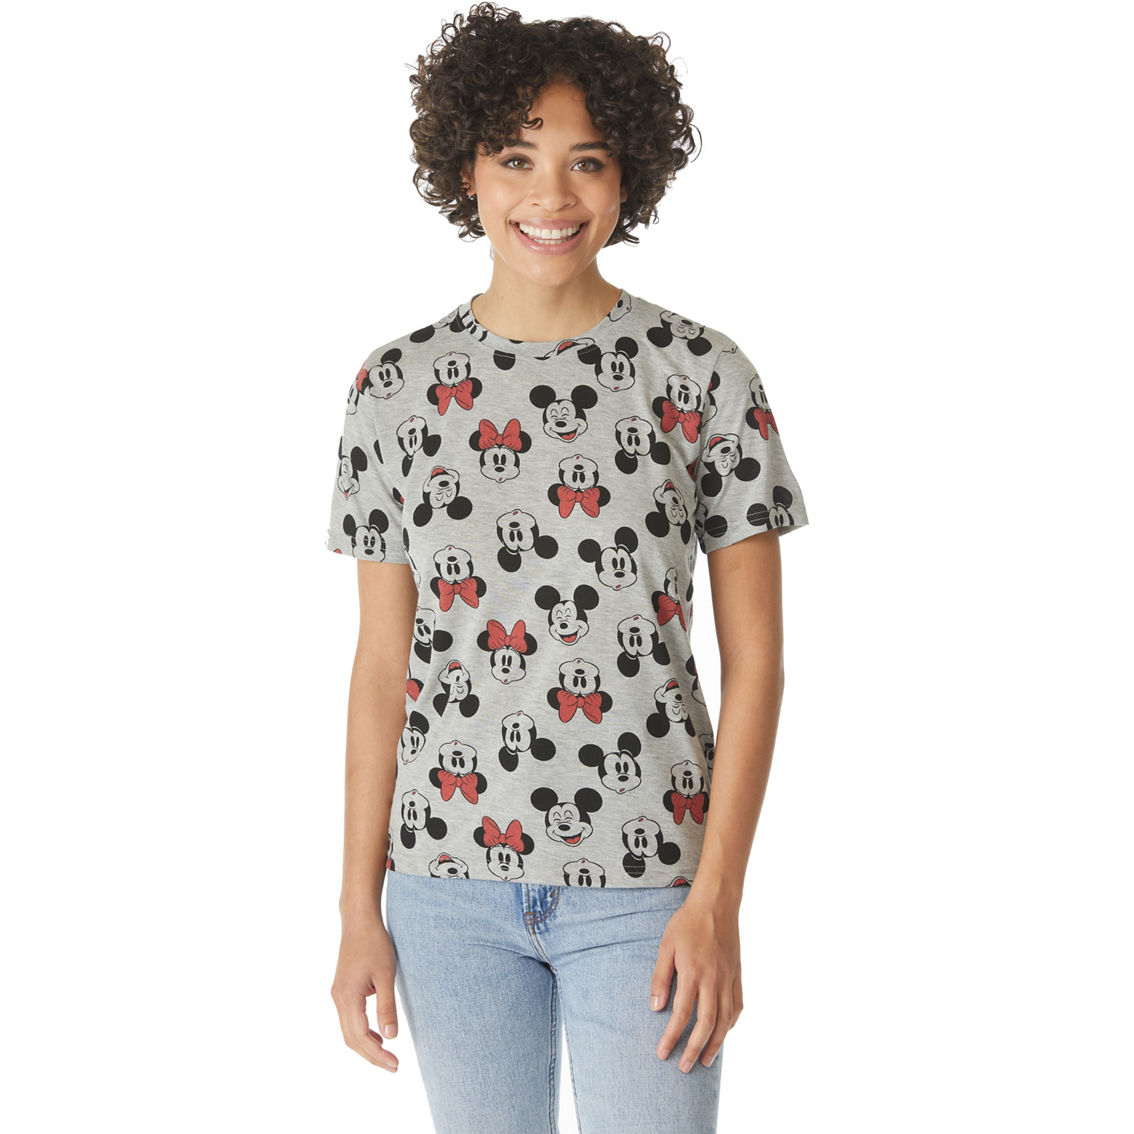 Jerry Leigh Juniors Disney Mickey and Minnie Mouse Allover Print Tee - Image 3 of 3